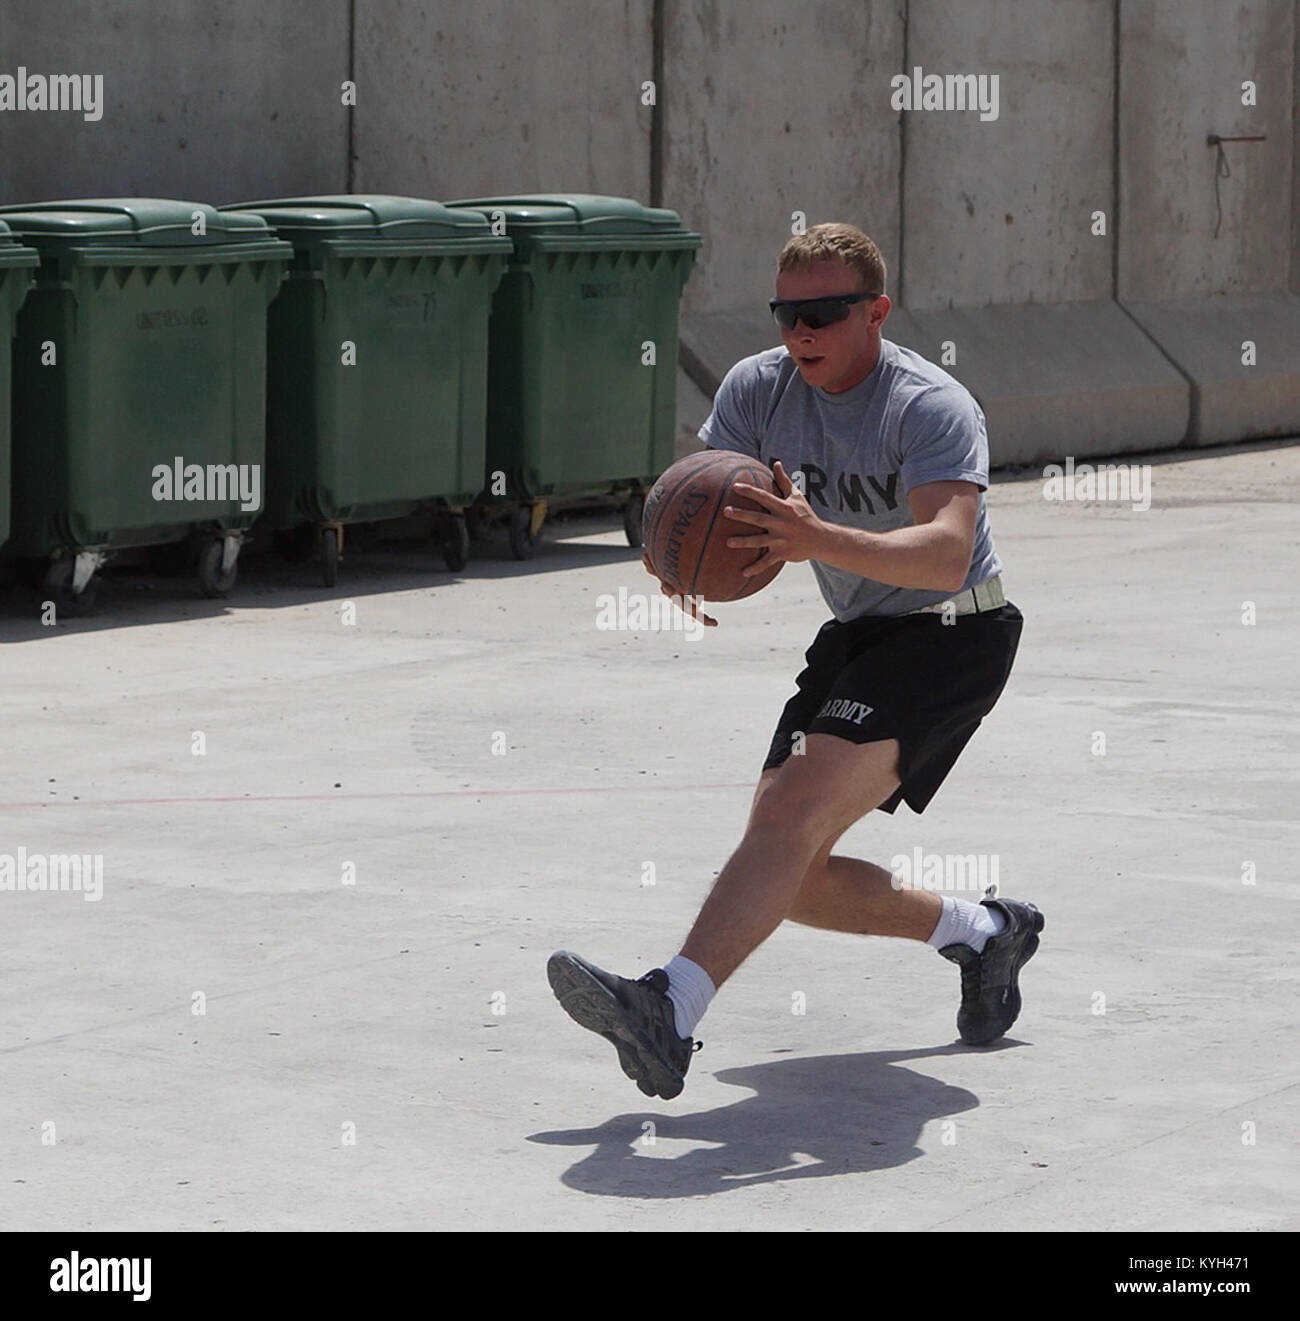 Spc. Jesse Loghry, a 22-year-old Irvington, Ky. resident on his third deployment in four years, chases down a basketball during team building exercises in Southern Afghanistan on April 23, 2012. Loghry, a combat medic by trade, serves as a vehicle gunner on Kentucky’s Agribusiness Development Team 4. (Photo by U.S. Army Staff Sgt. Paul Evans) Stock Photo